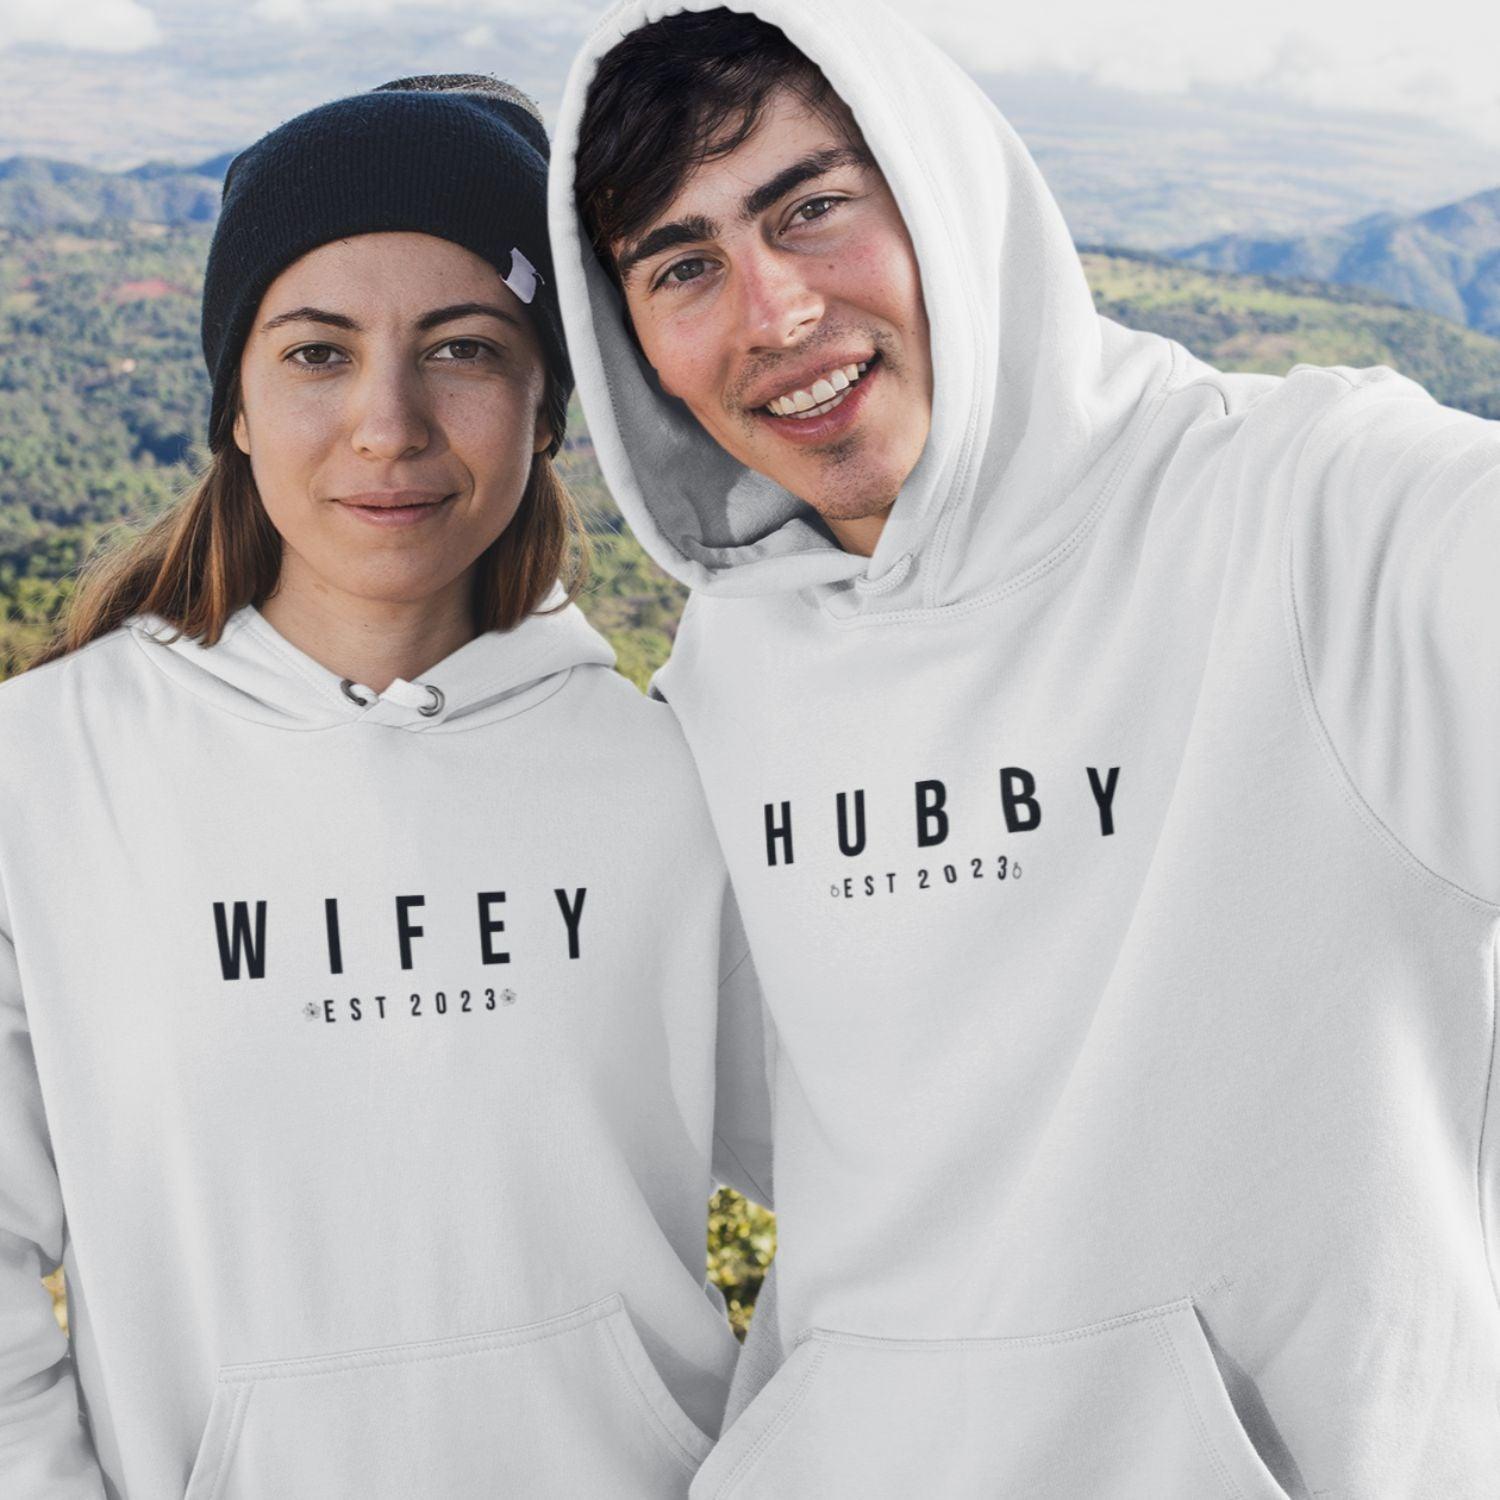 Custom Matching Wifey & Hubby Outfits [Year] - Perfect Gift! - 4Lovebirds